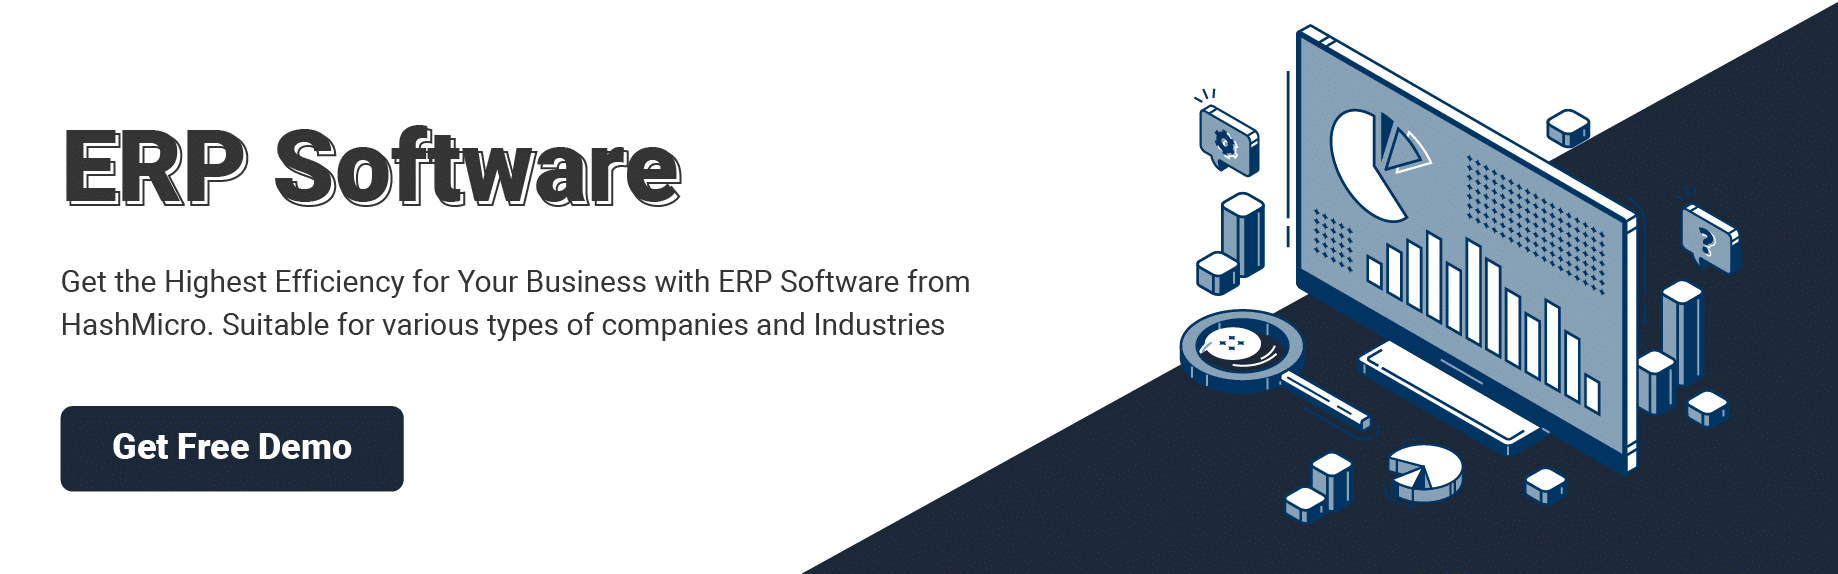 erp software in singapore